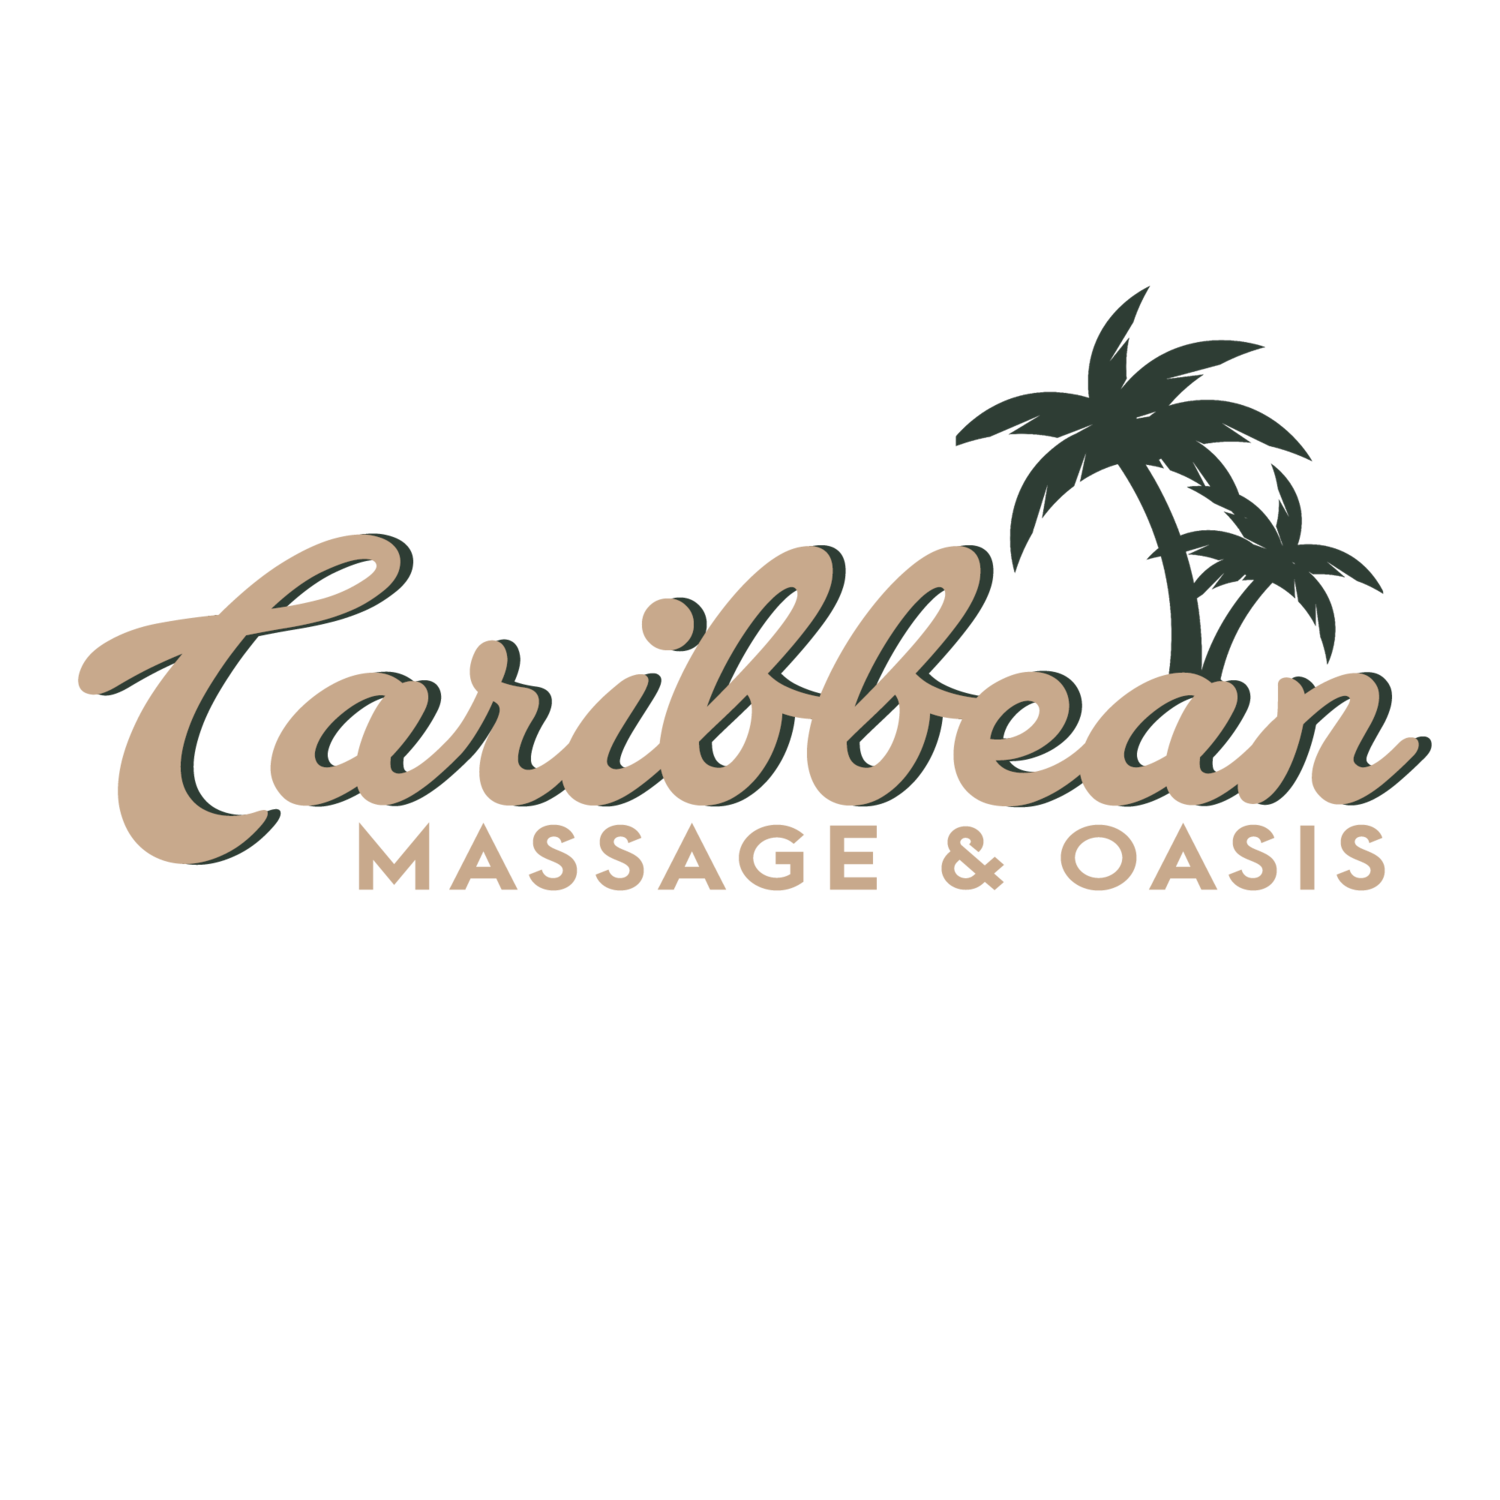 Caribbean Massage and Oasis